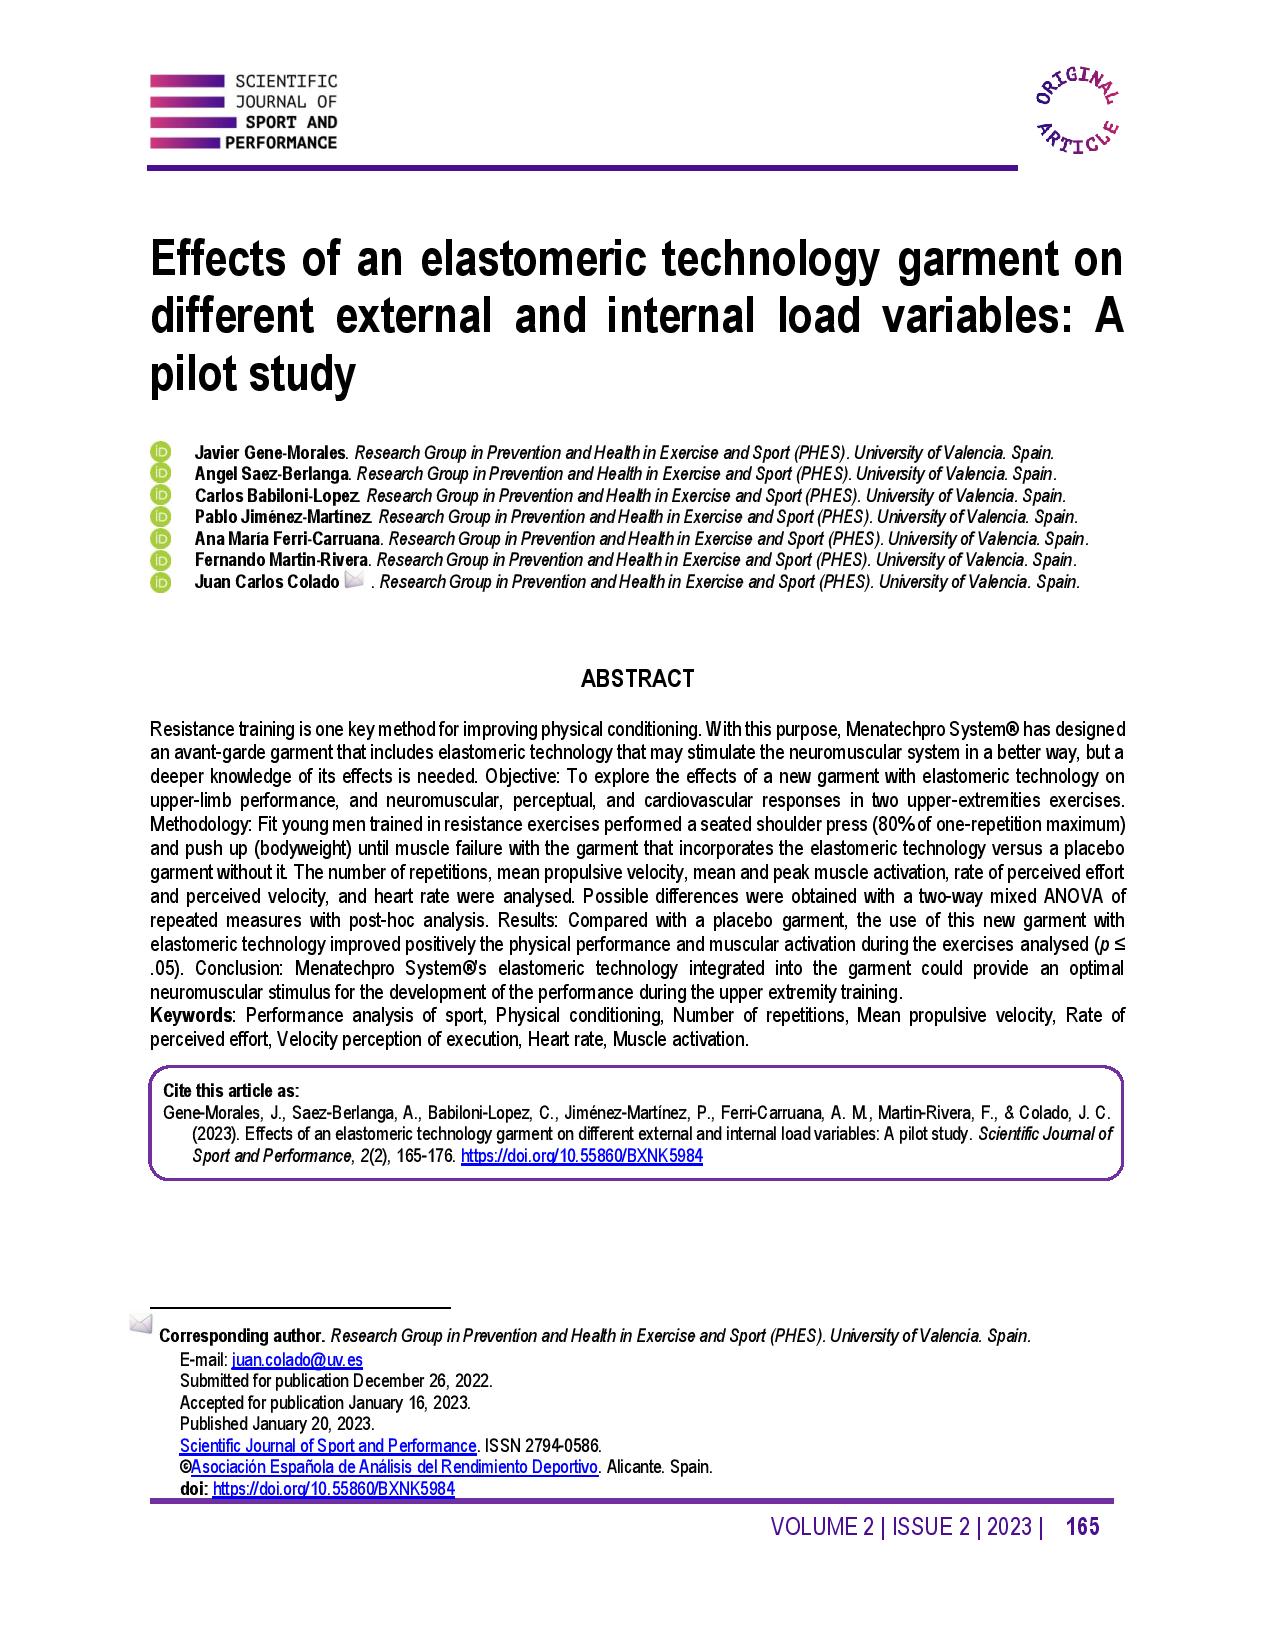 Effects of an elastomeric technology garment on different external and internal load variables: A pilot study